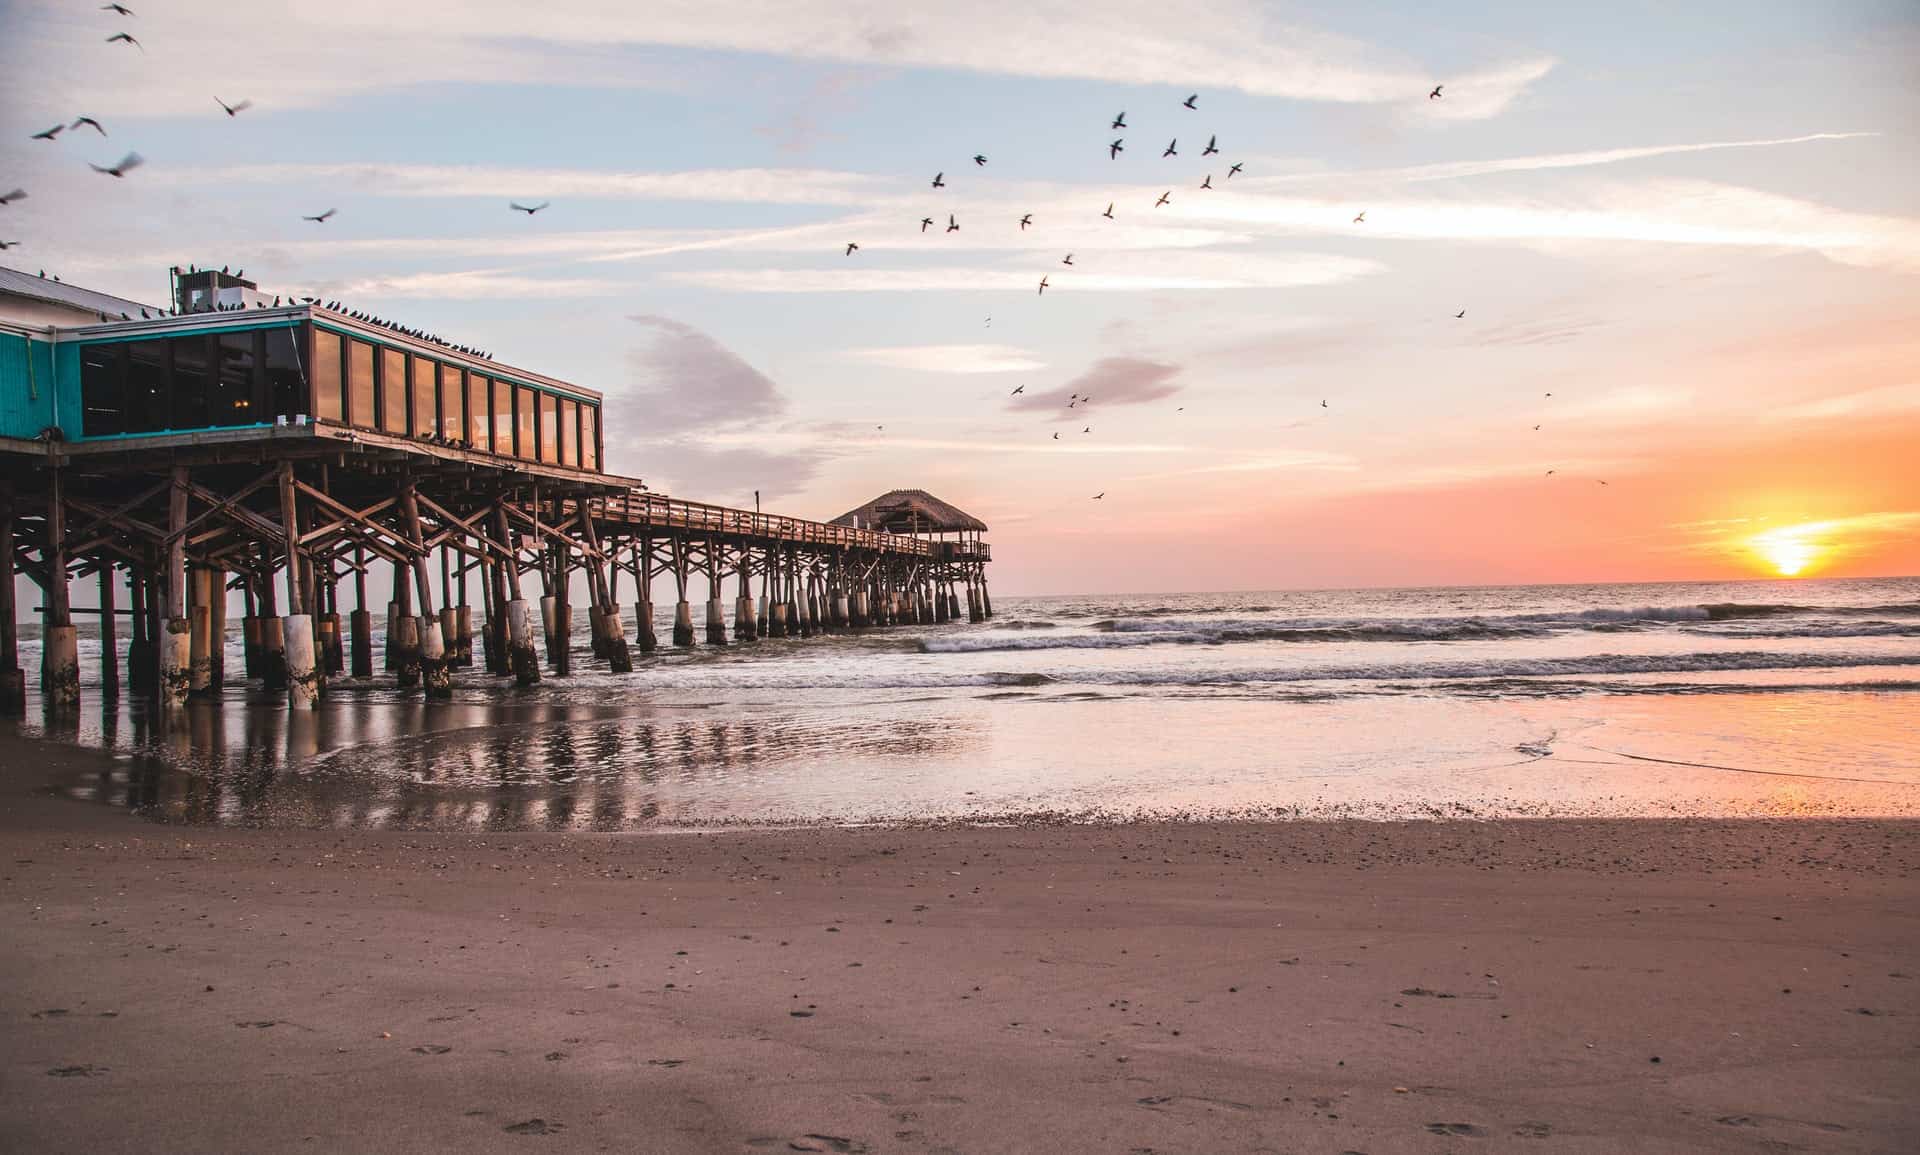 Best things to do in Cocoa Beach Florida - Nate Beck - Cocoa Beach pier by Florian Schneider on Unsplash